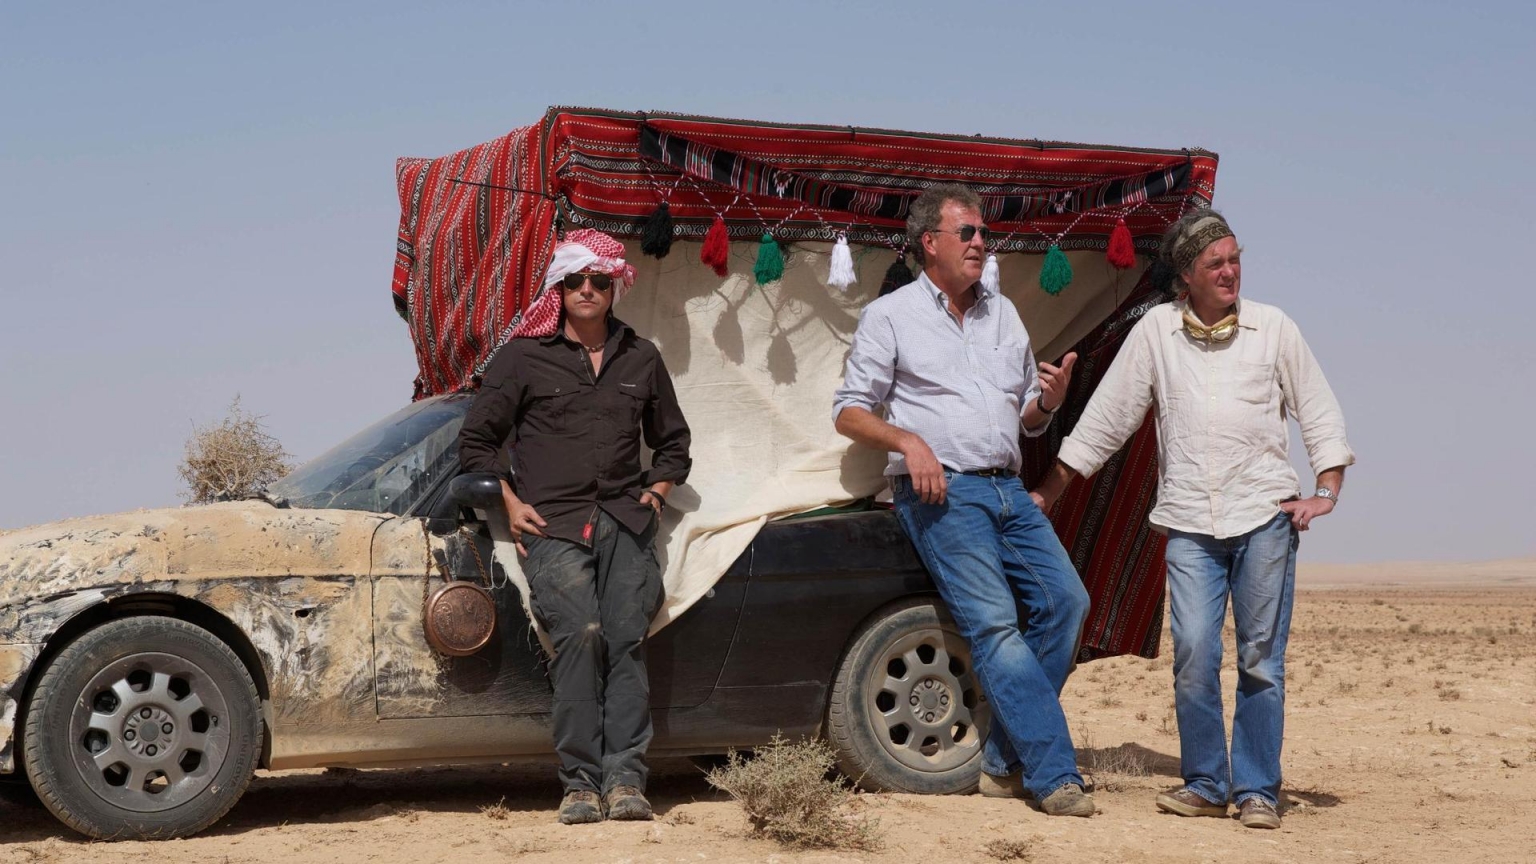 Top Gear for 1536 x 864 HDTV resolution